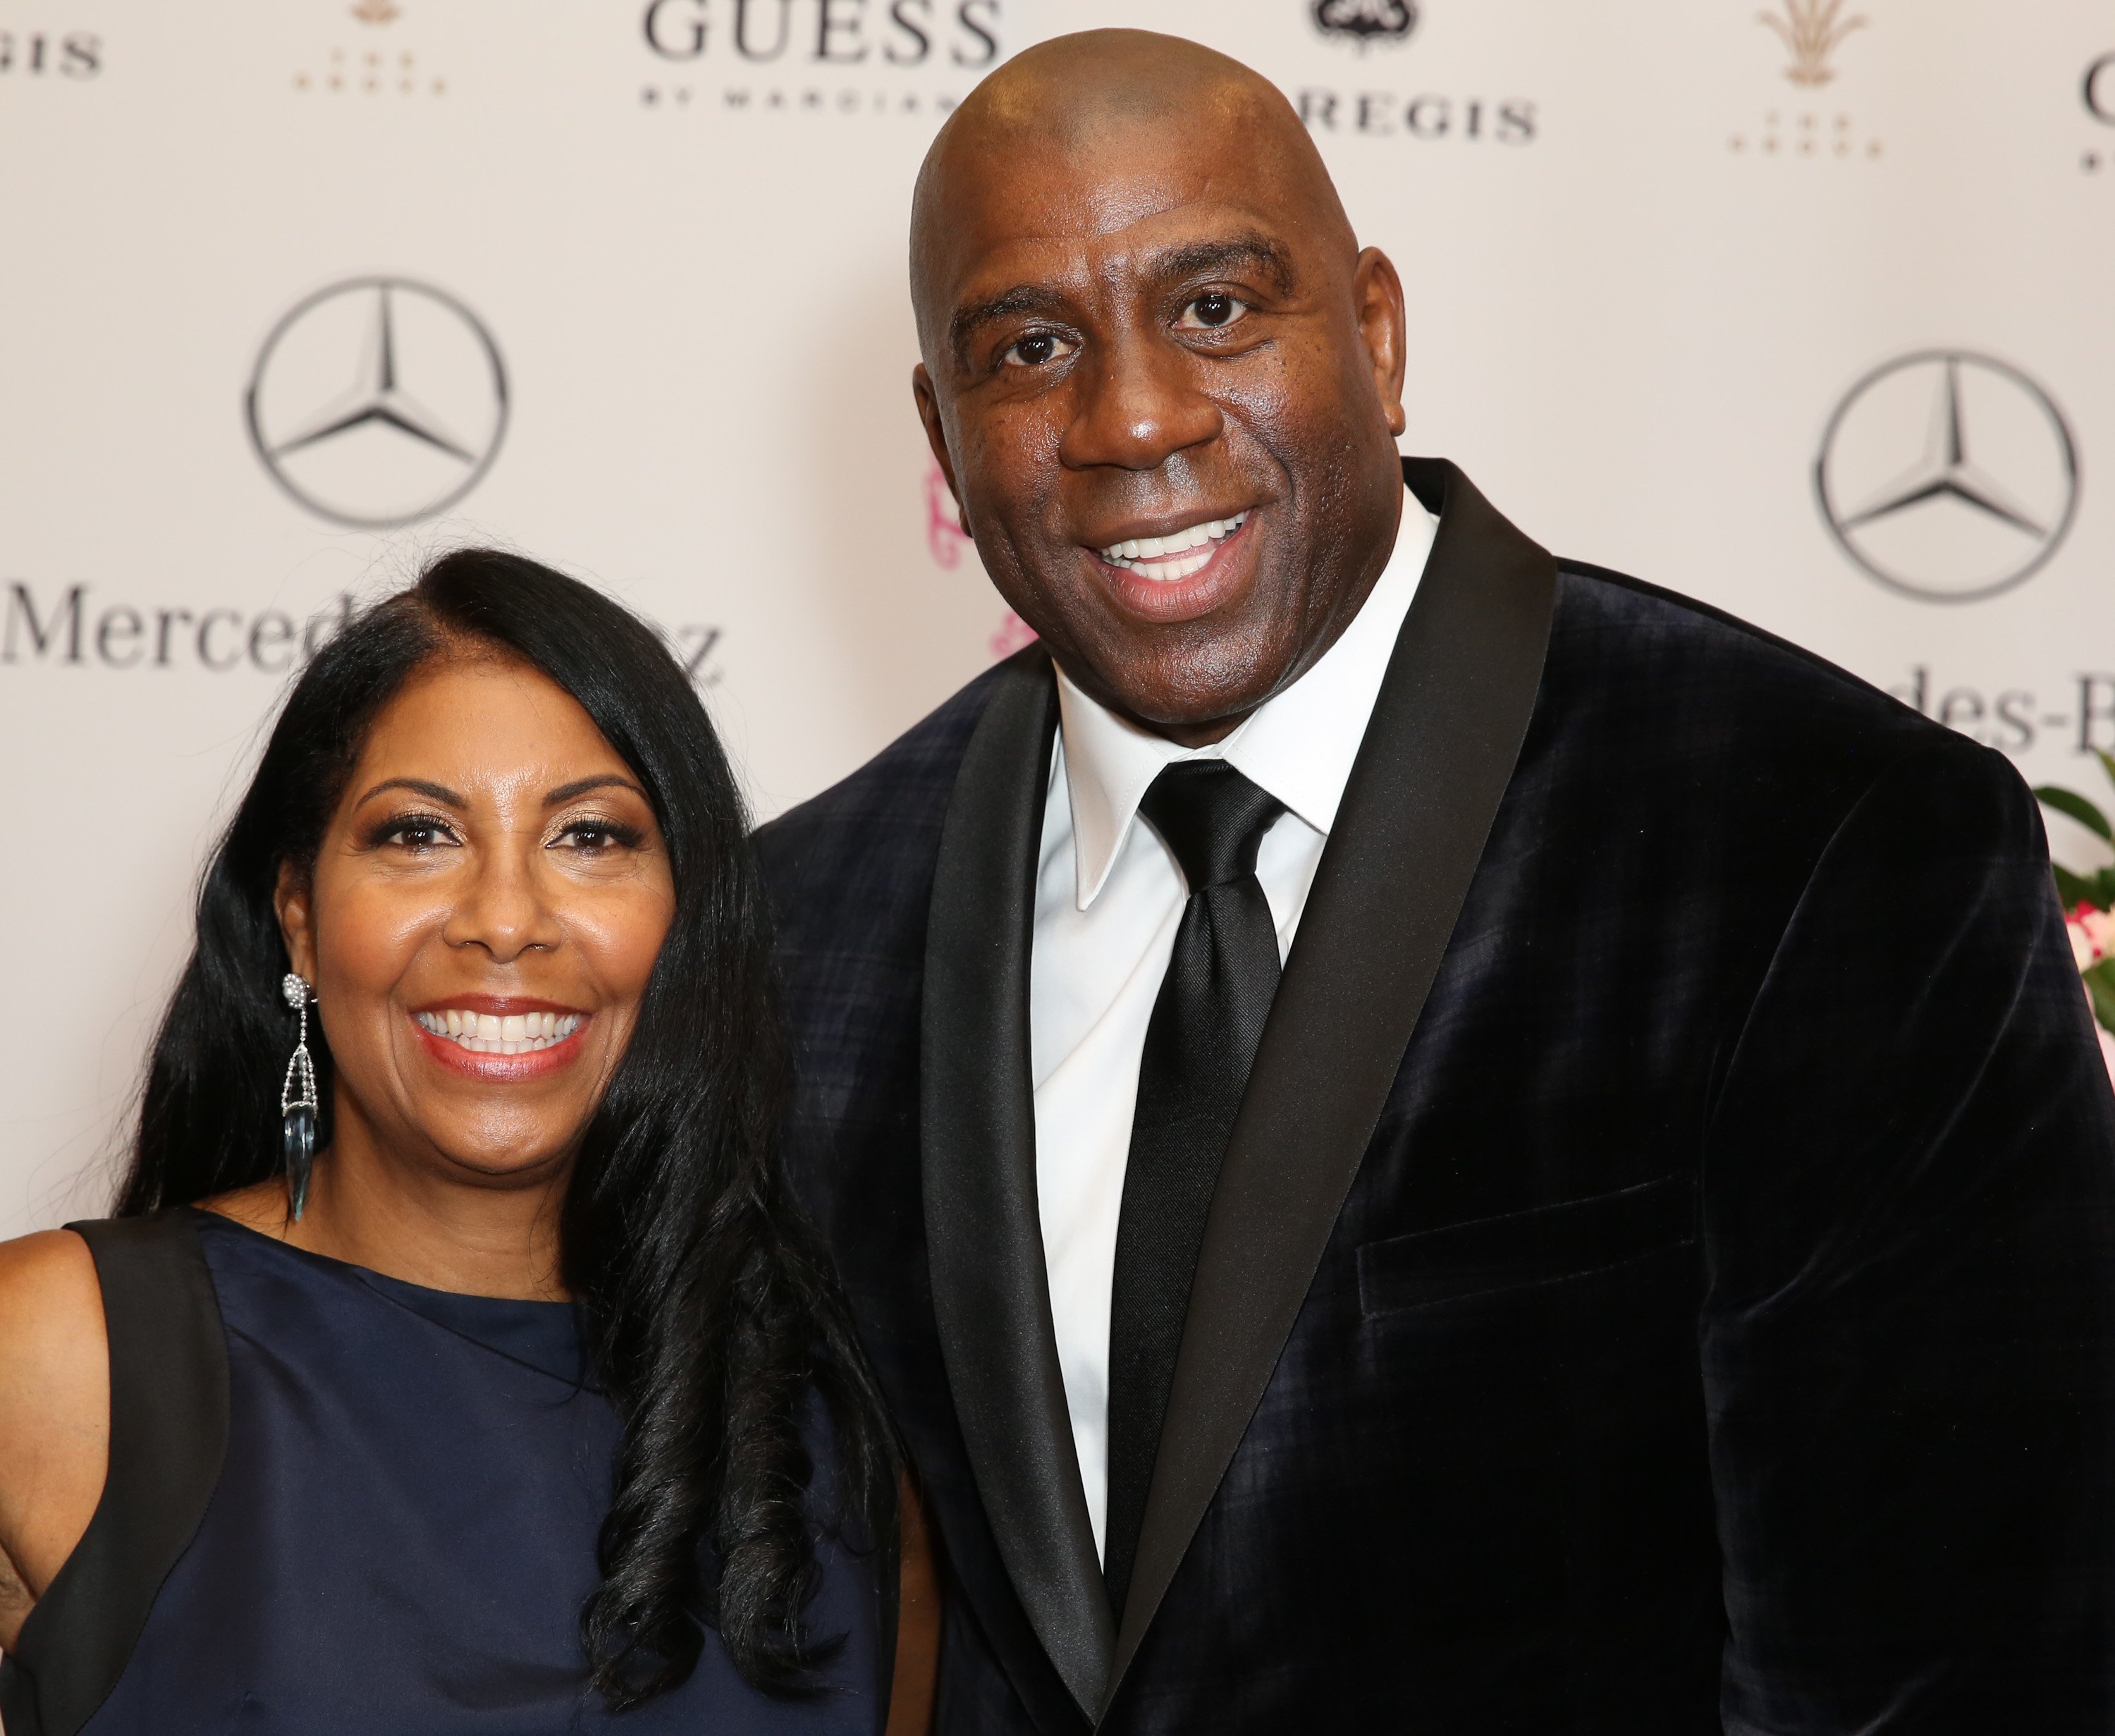 Cookie Johnson & Earvin 'Magic' Johnson at the Carousel of Hope Ball on Oct. 11, 2014 in California. | Source: Getty Images